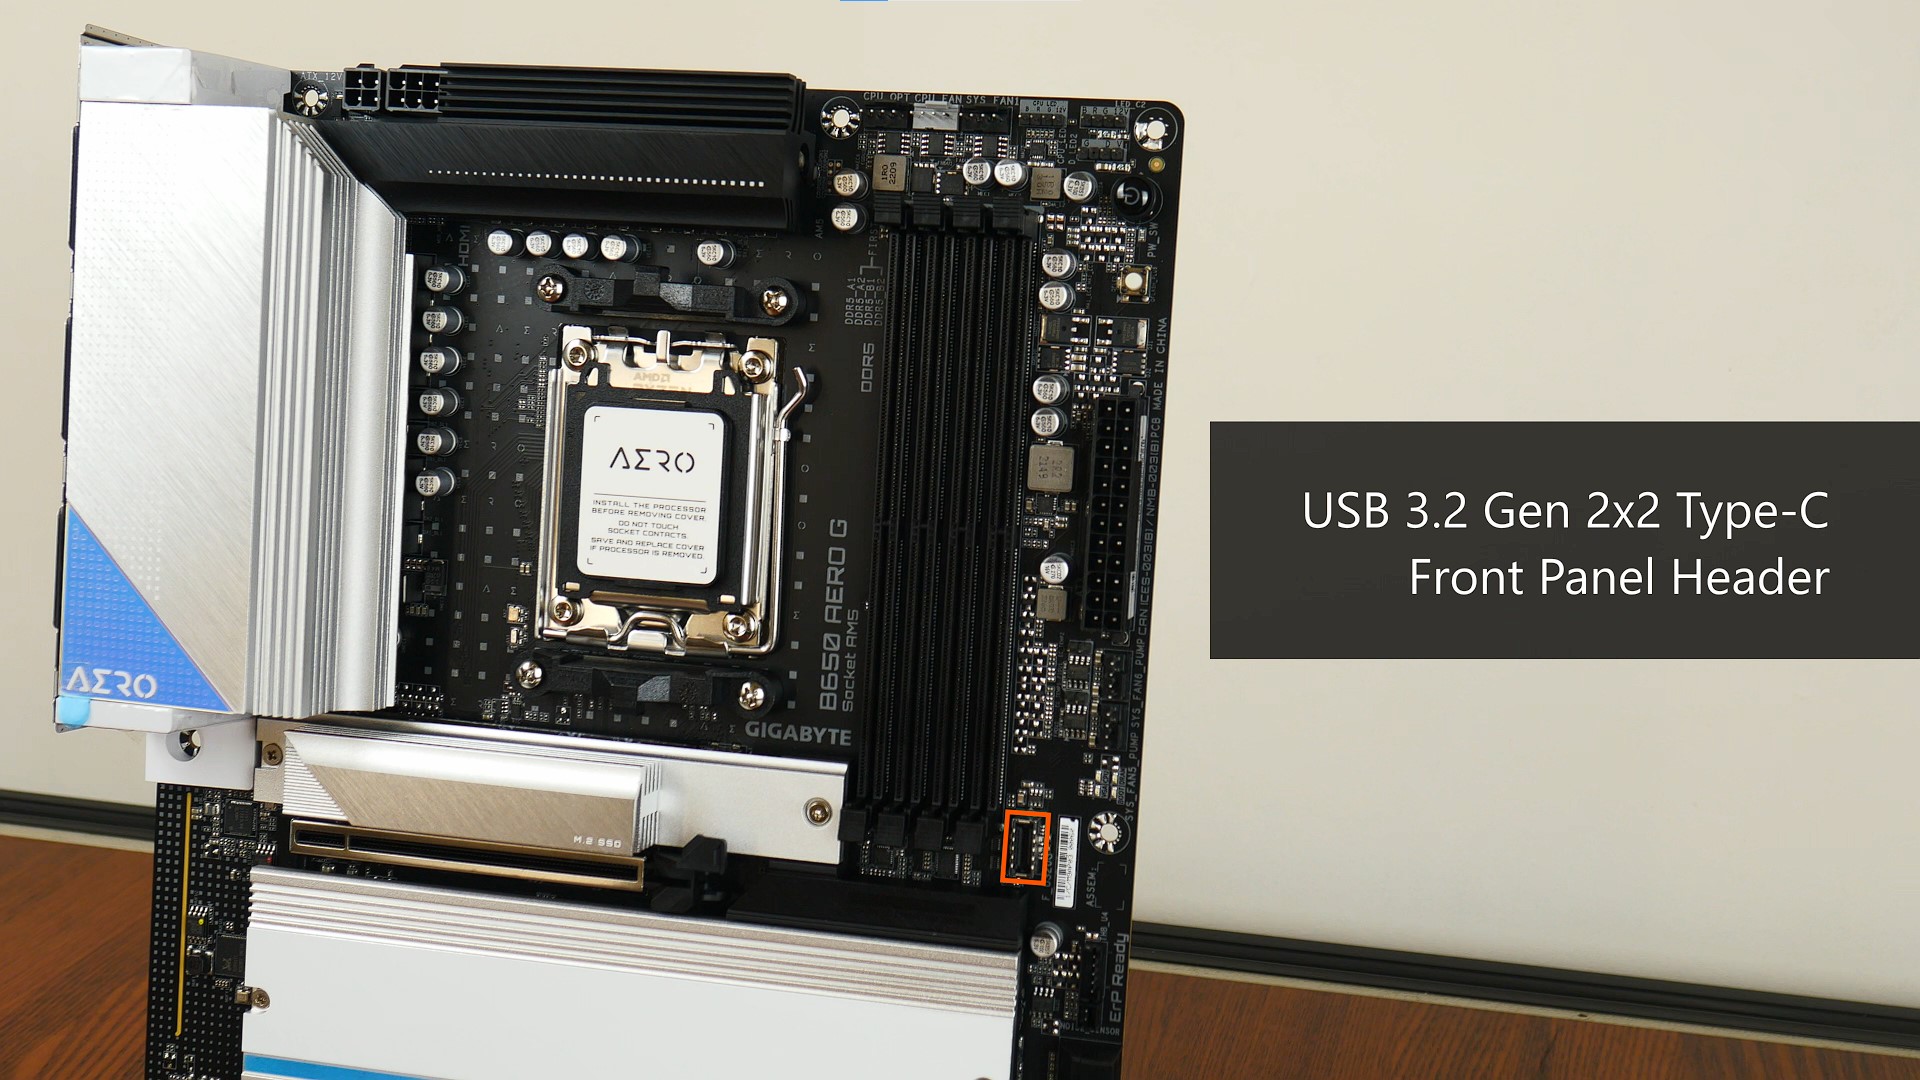 Perfect AM5 Board for Creators & White PC Builds? Gigabyte B650 AERO G  Unboxing & Overview 